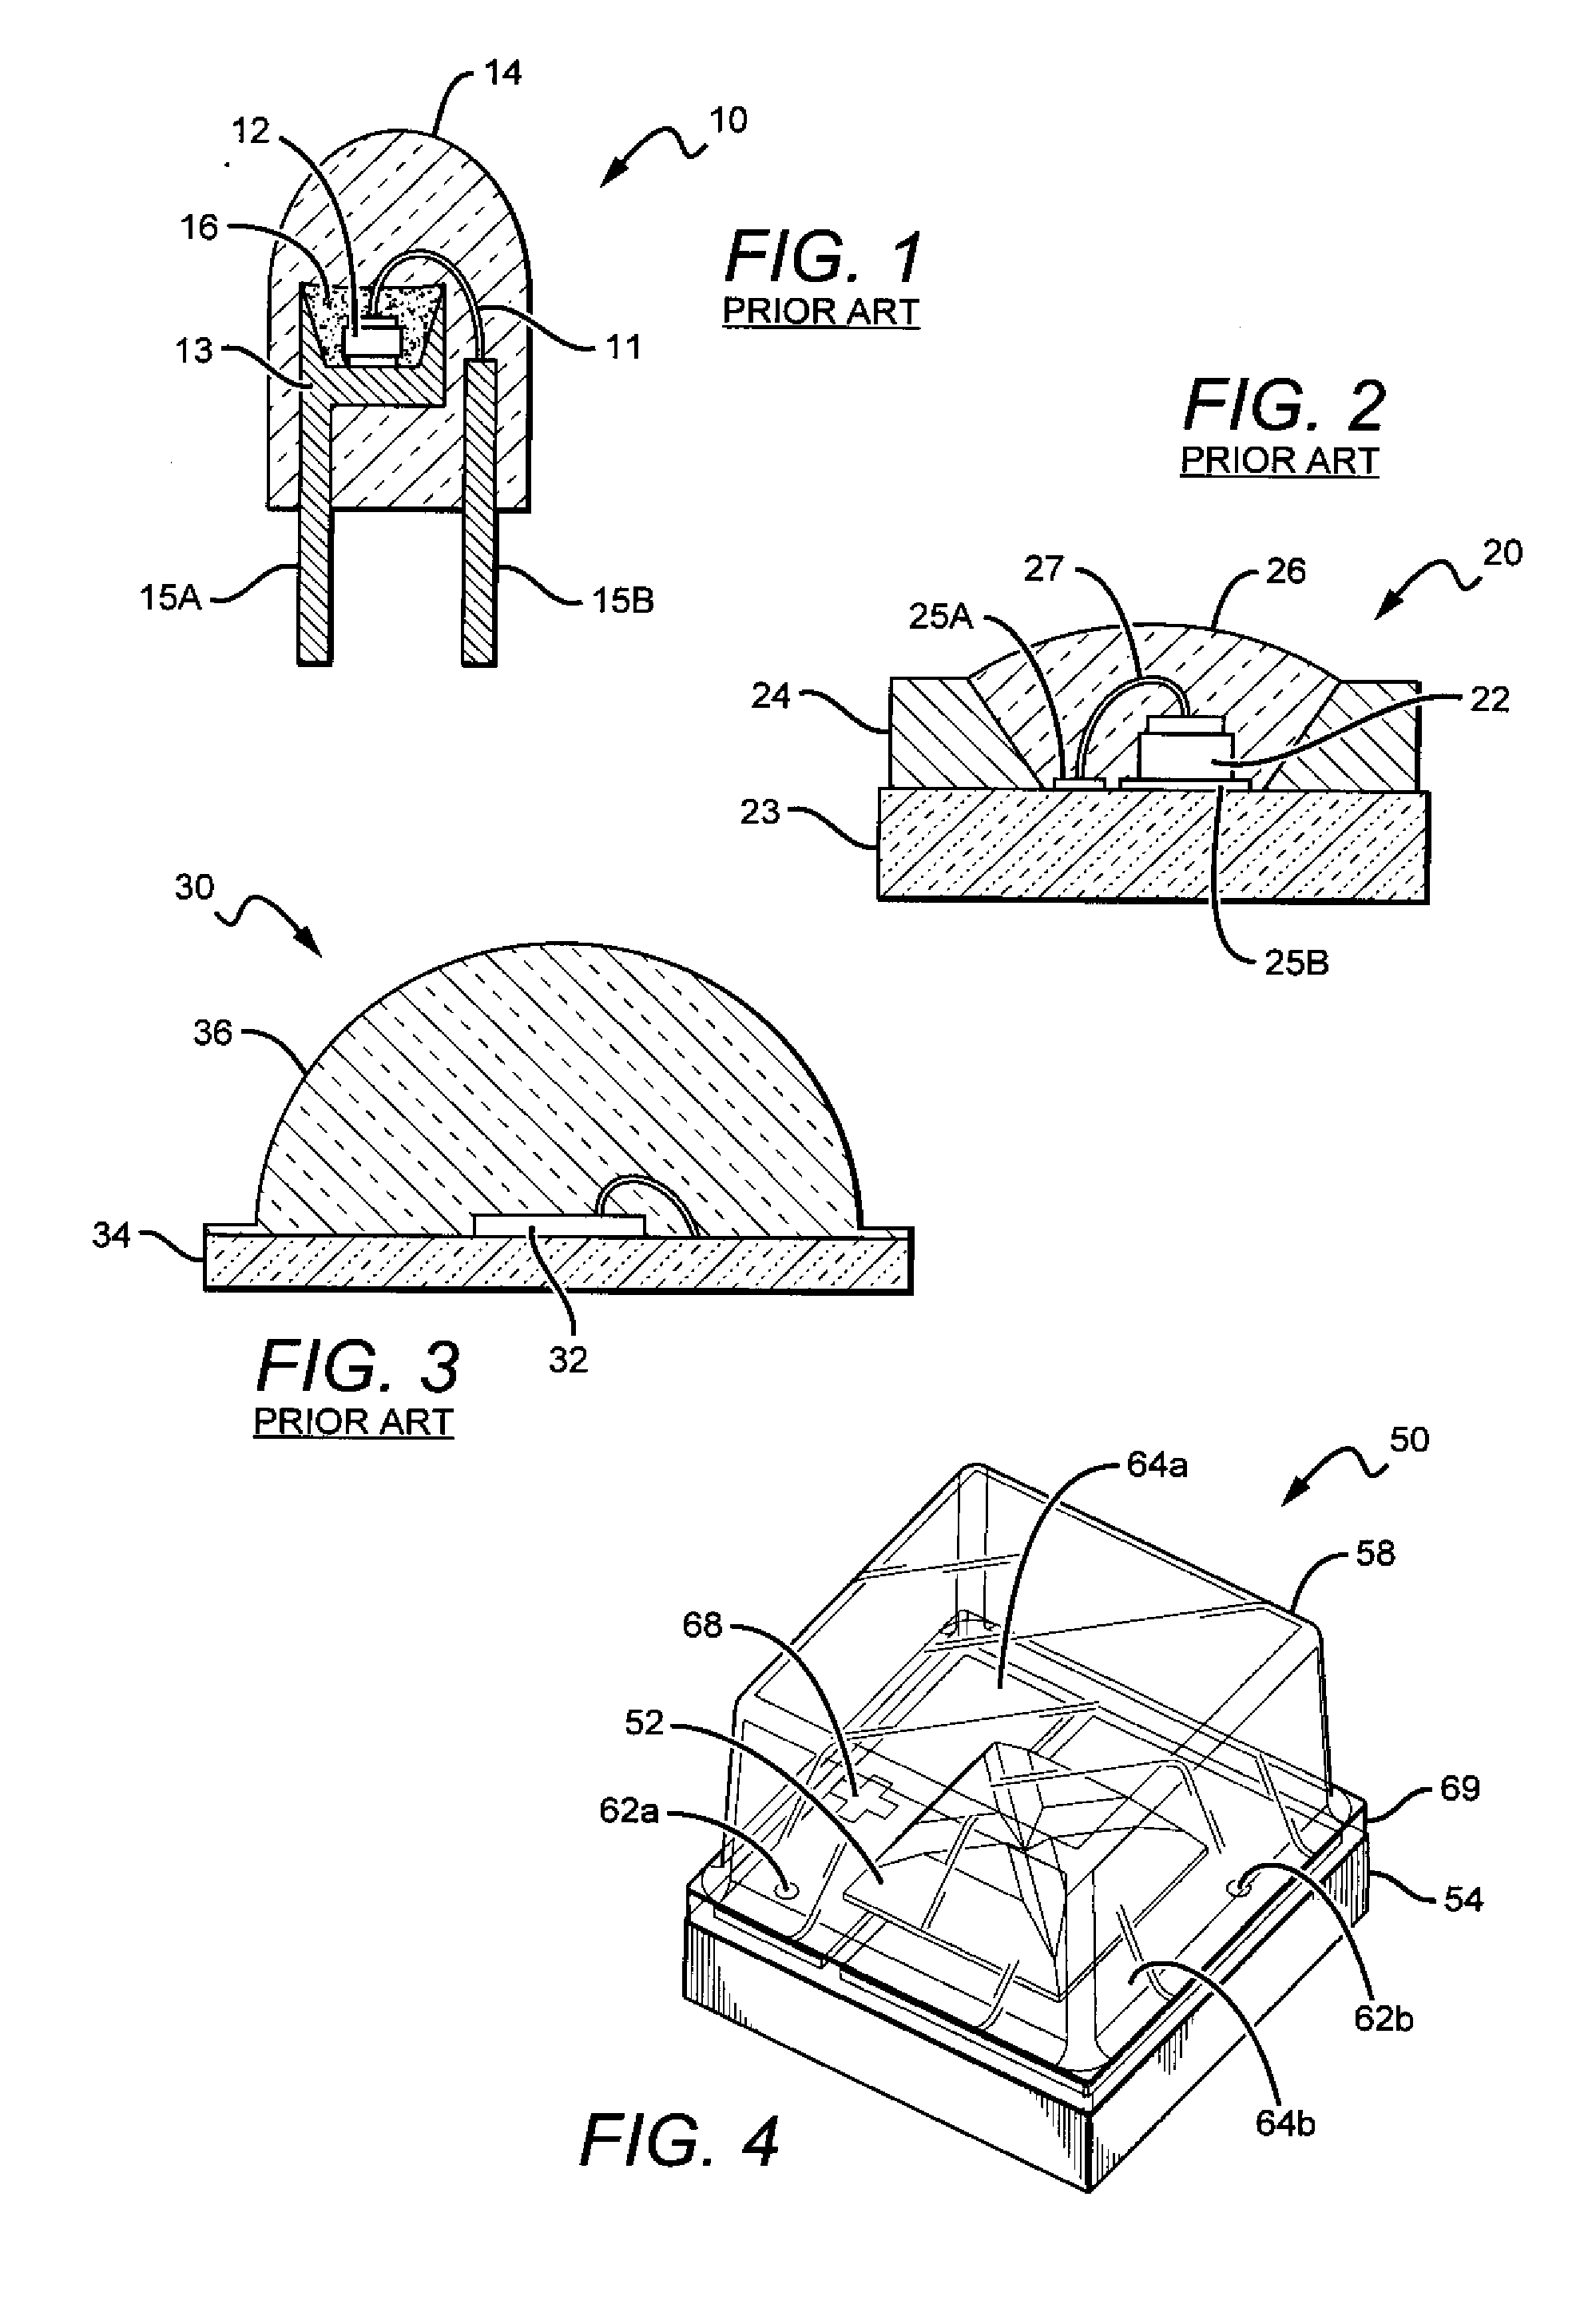 LED package with encapsulant having curved and planar surfaces